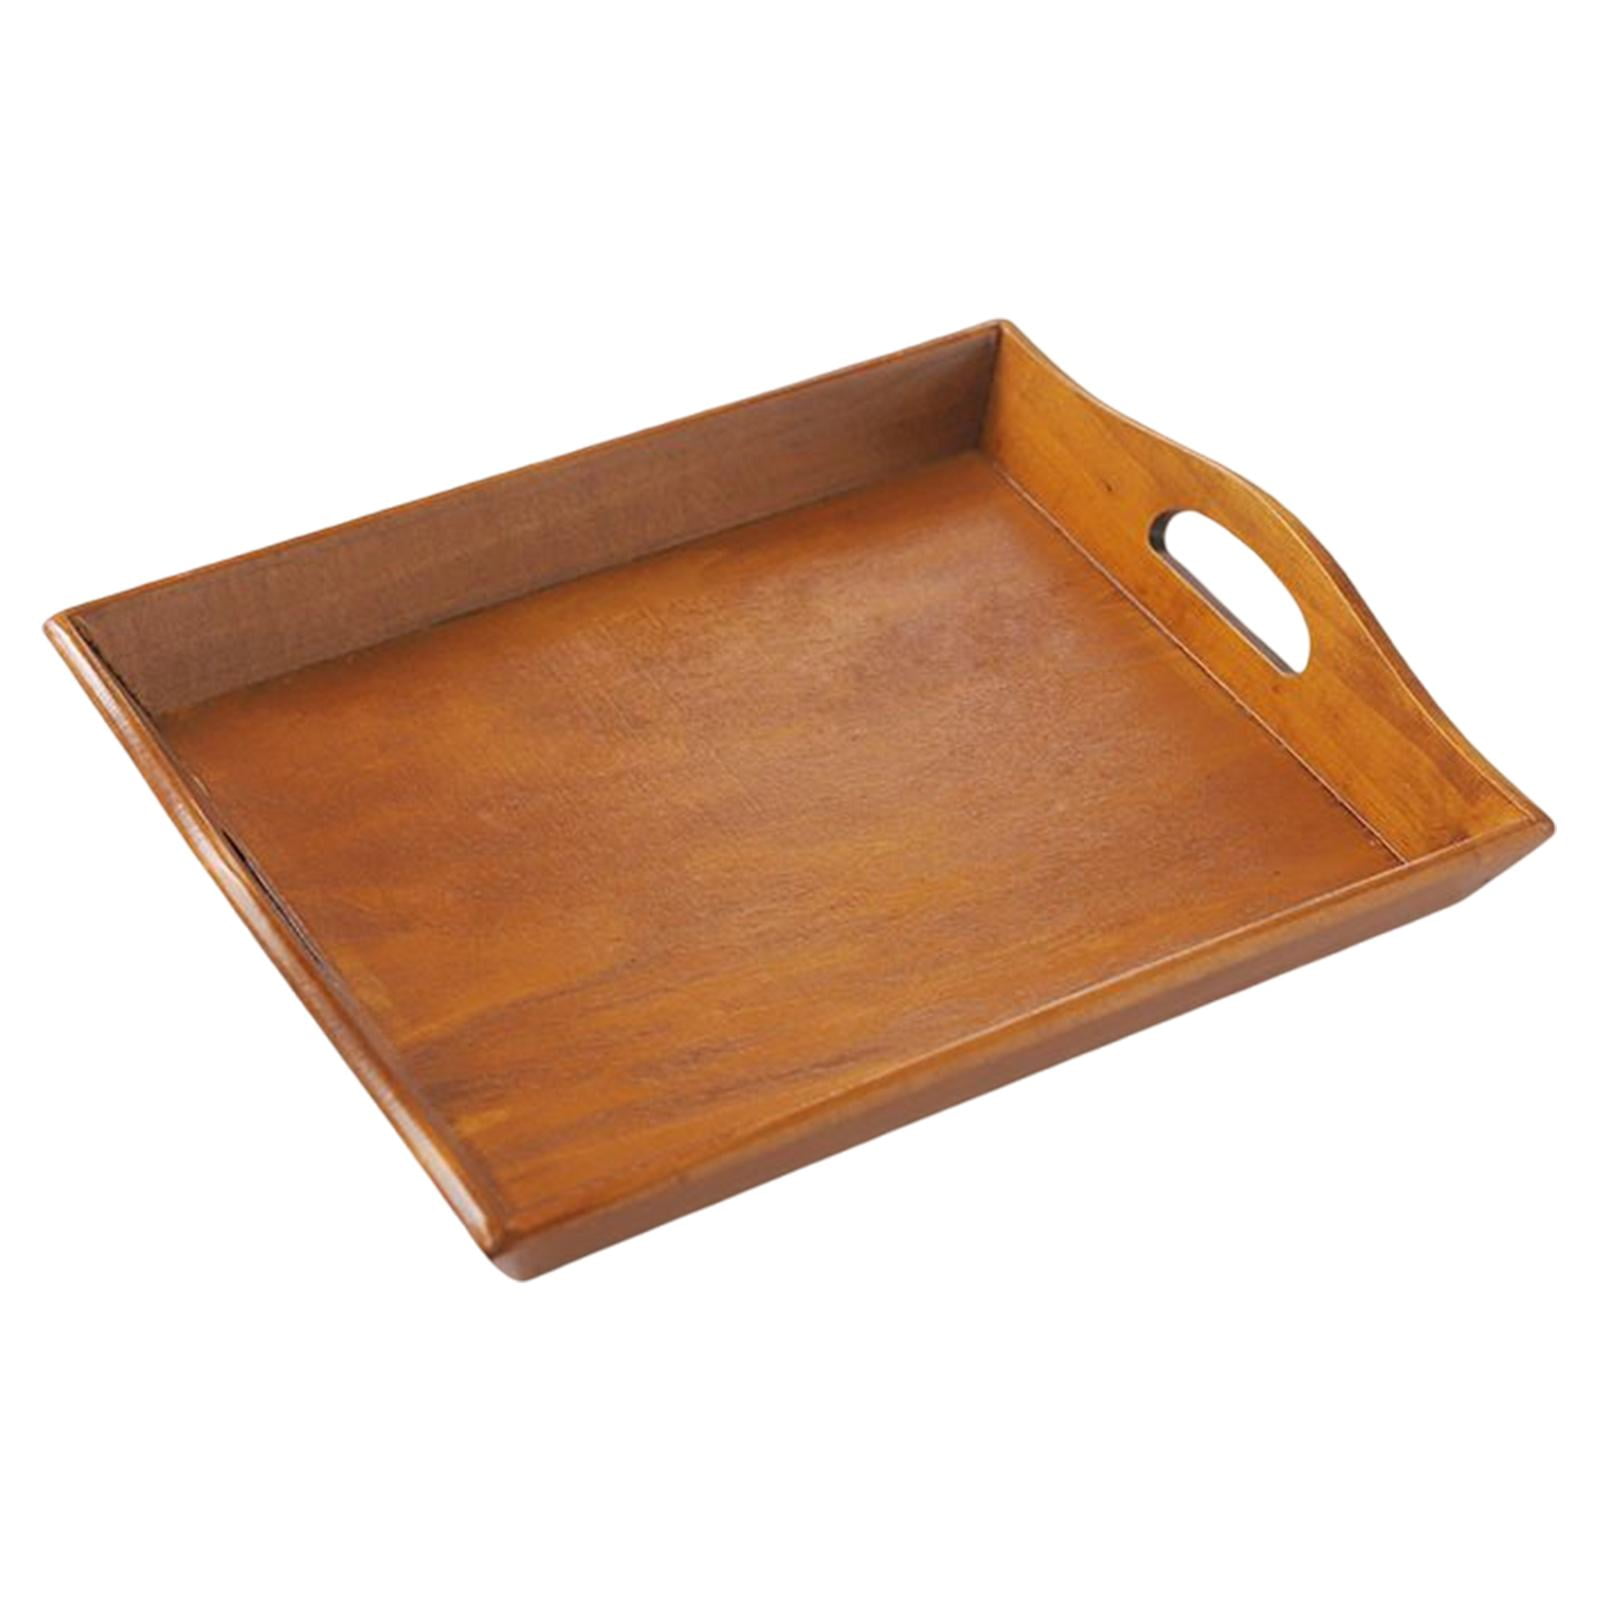 Ottoman Tray, 12'' x 10'' x 1'' Wooden Serving Tray with Handles for ...